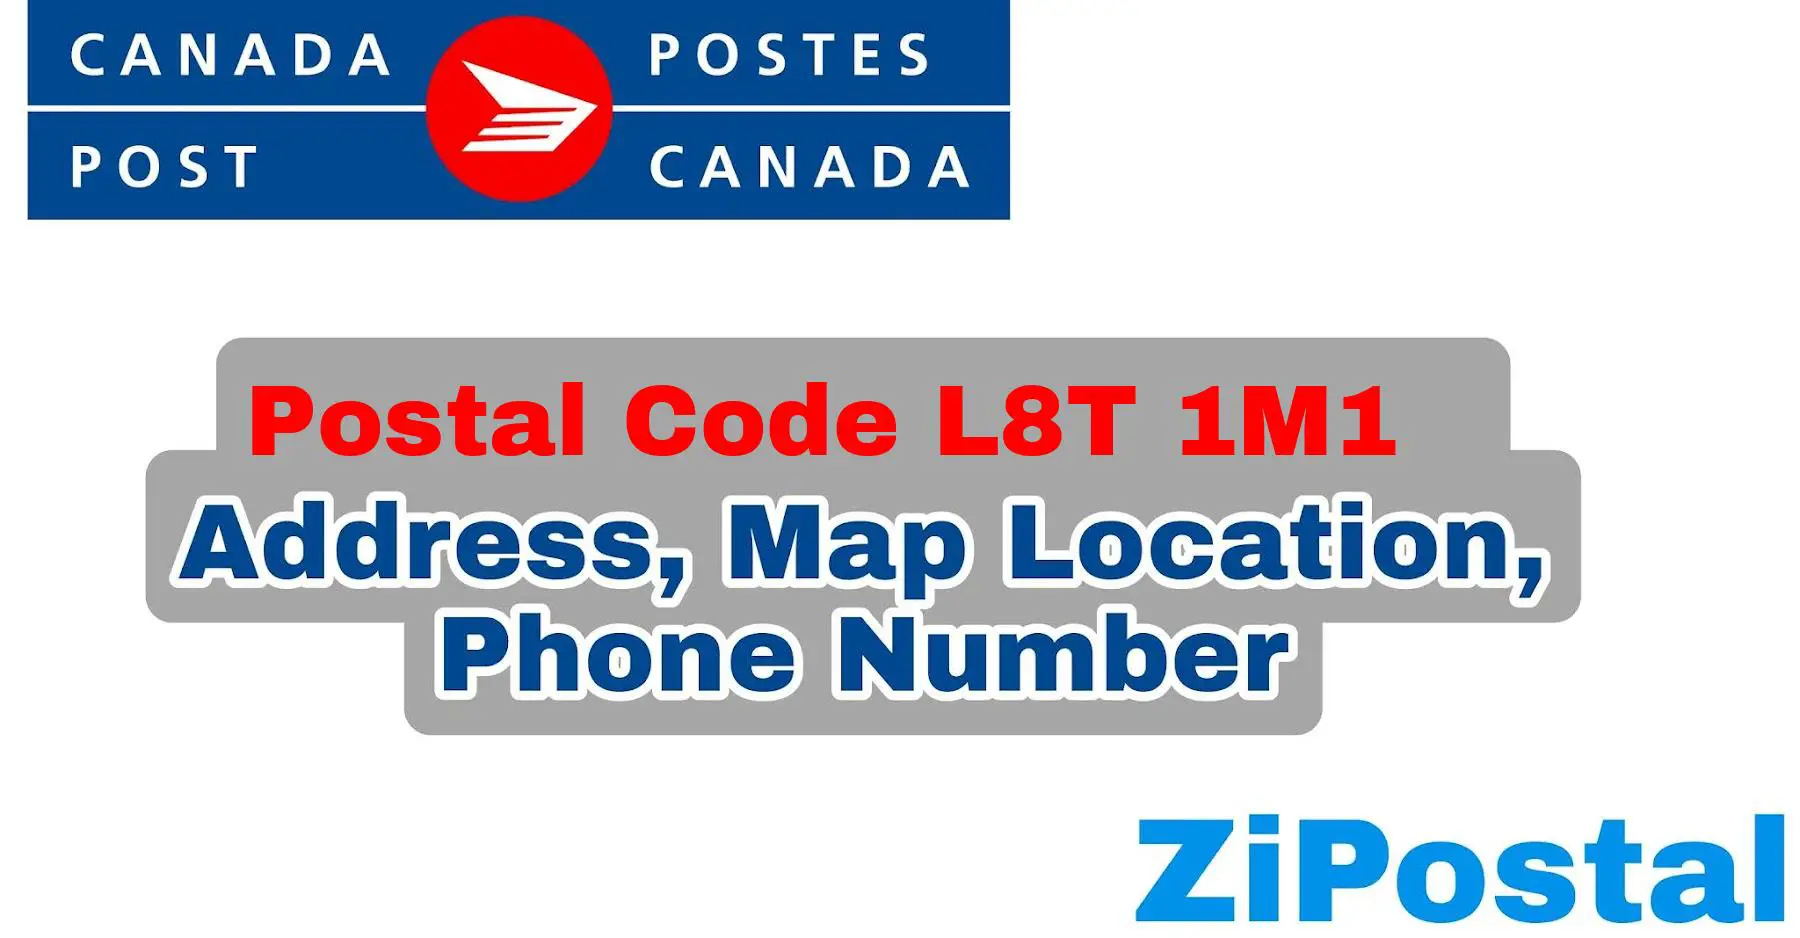 Postal Code L8T 1M1 Address Map Location and Phone Number